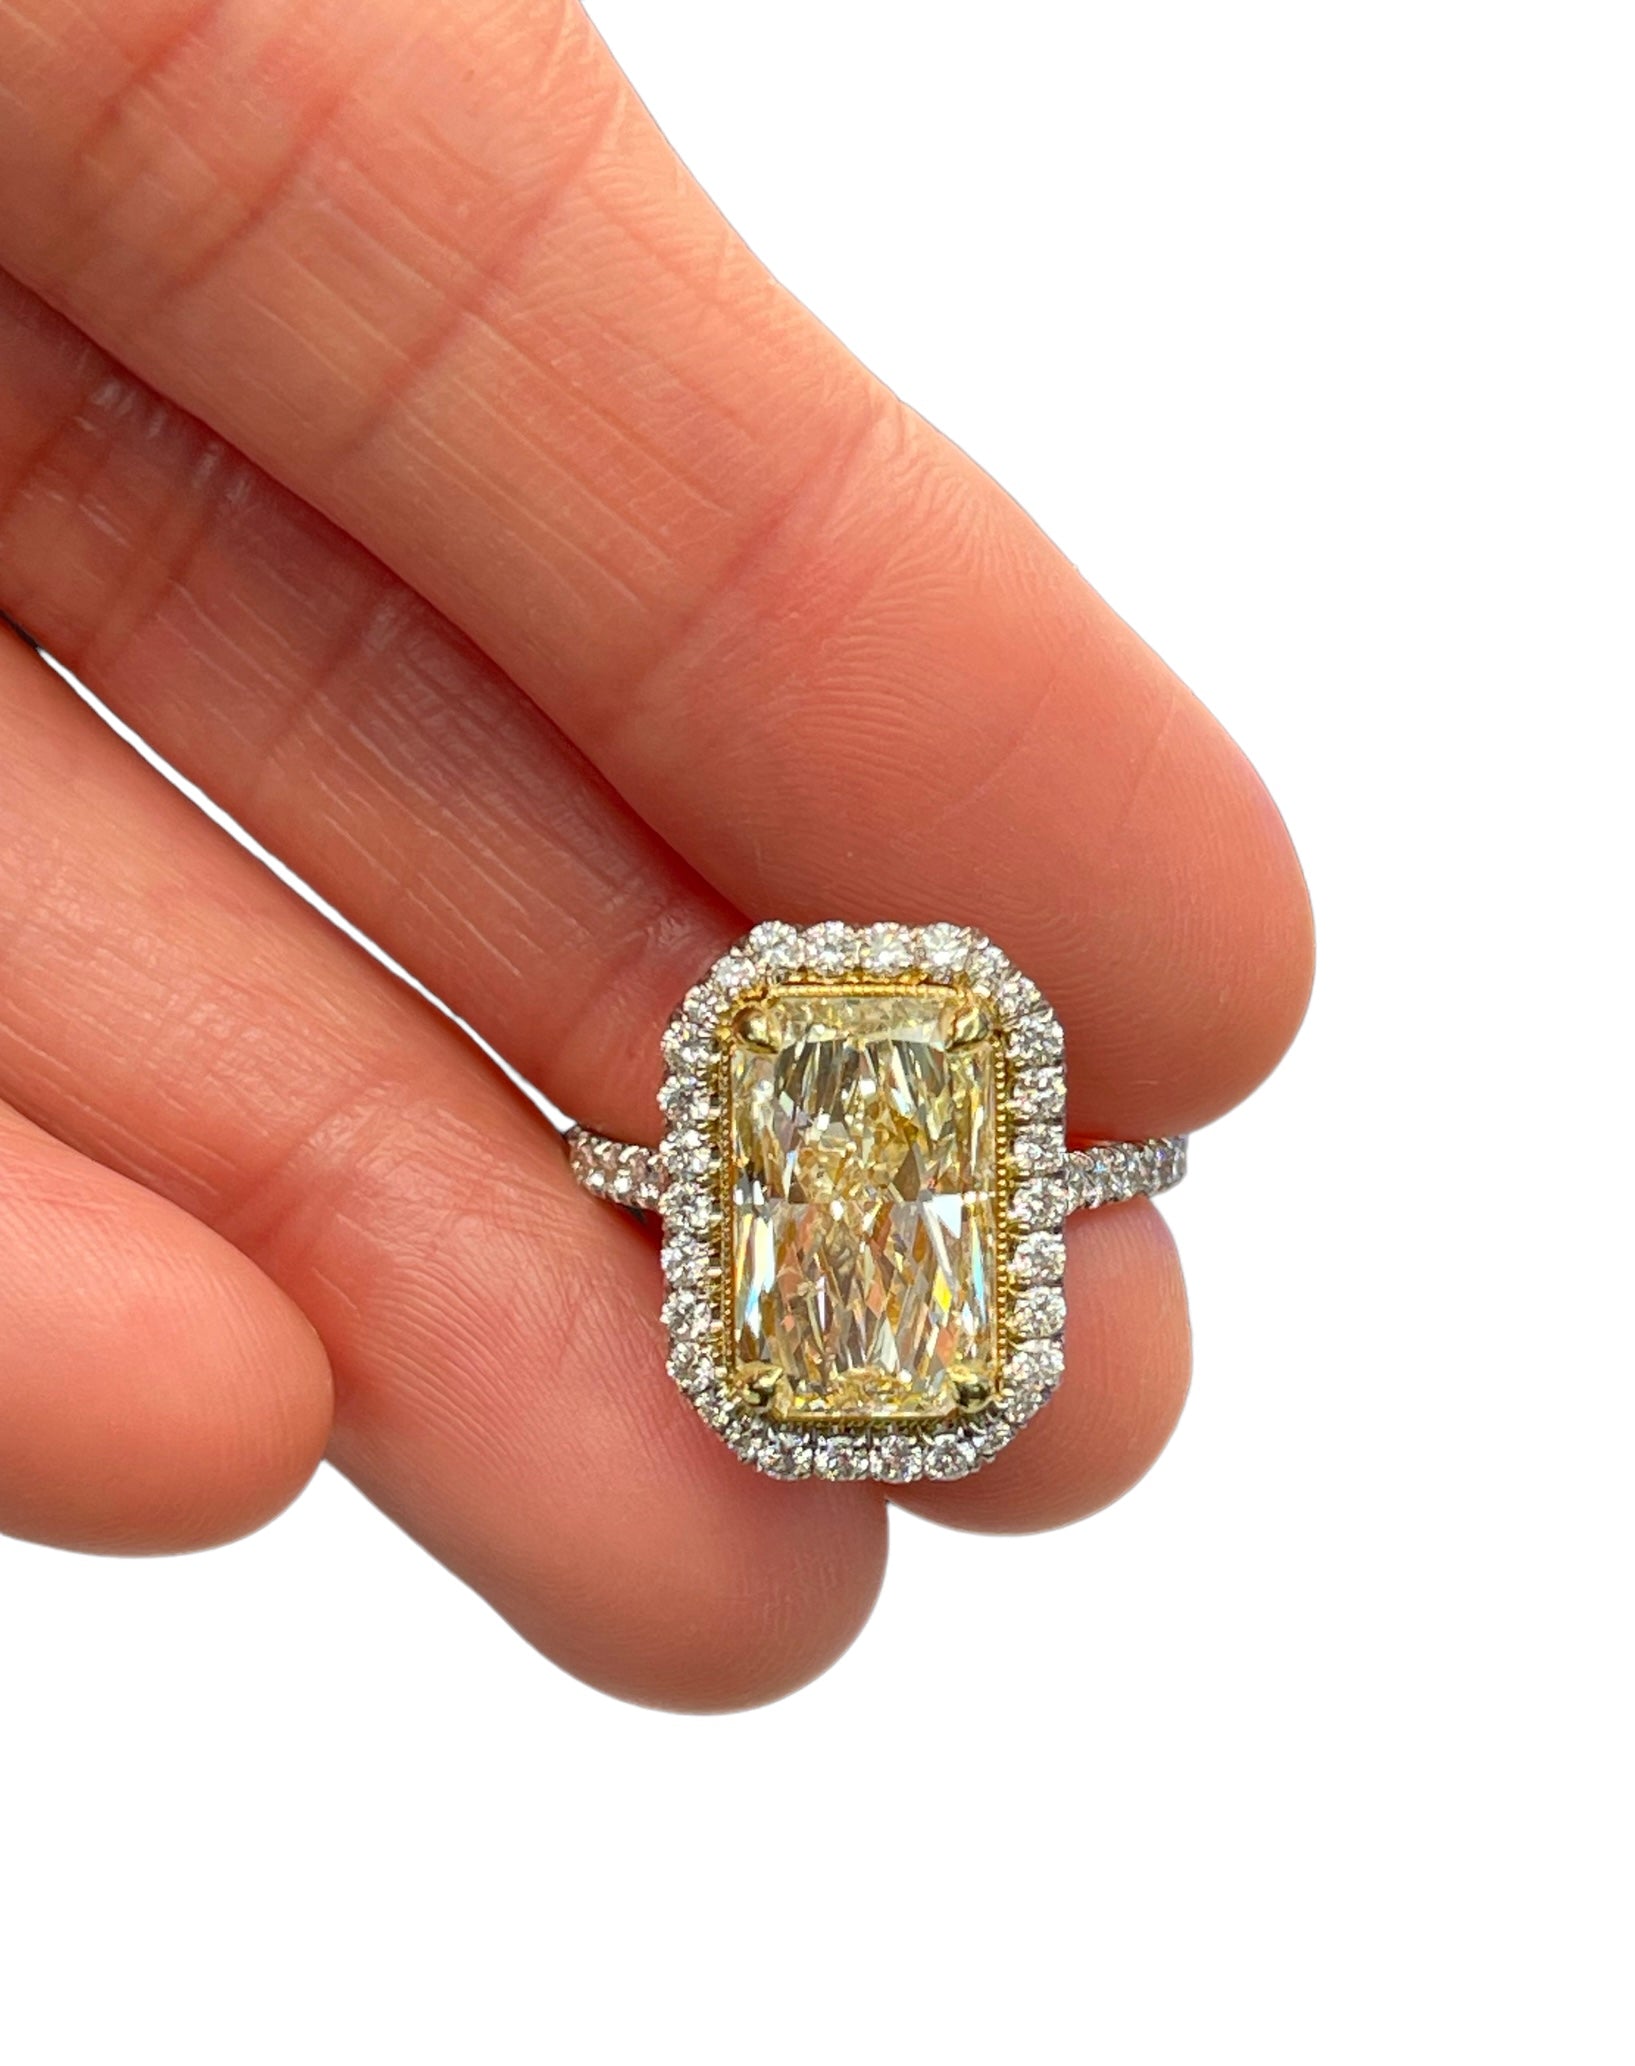 Certified Fancy Light Yellow Radiant Diamond Engagement Ring 4.62 Carats